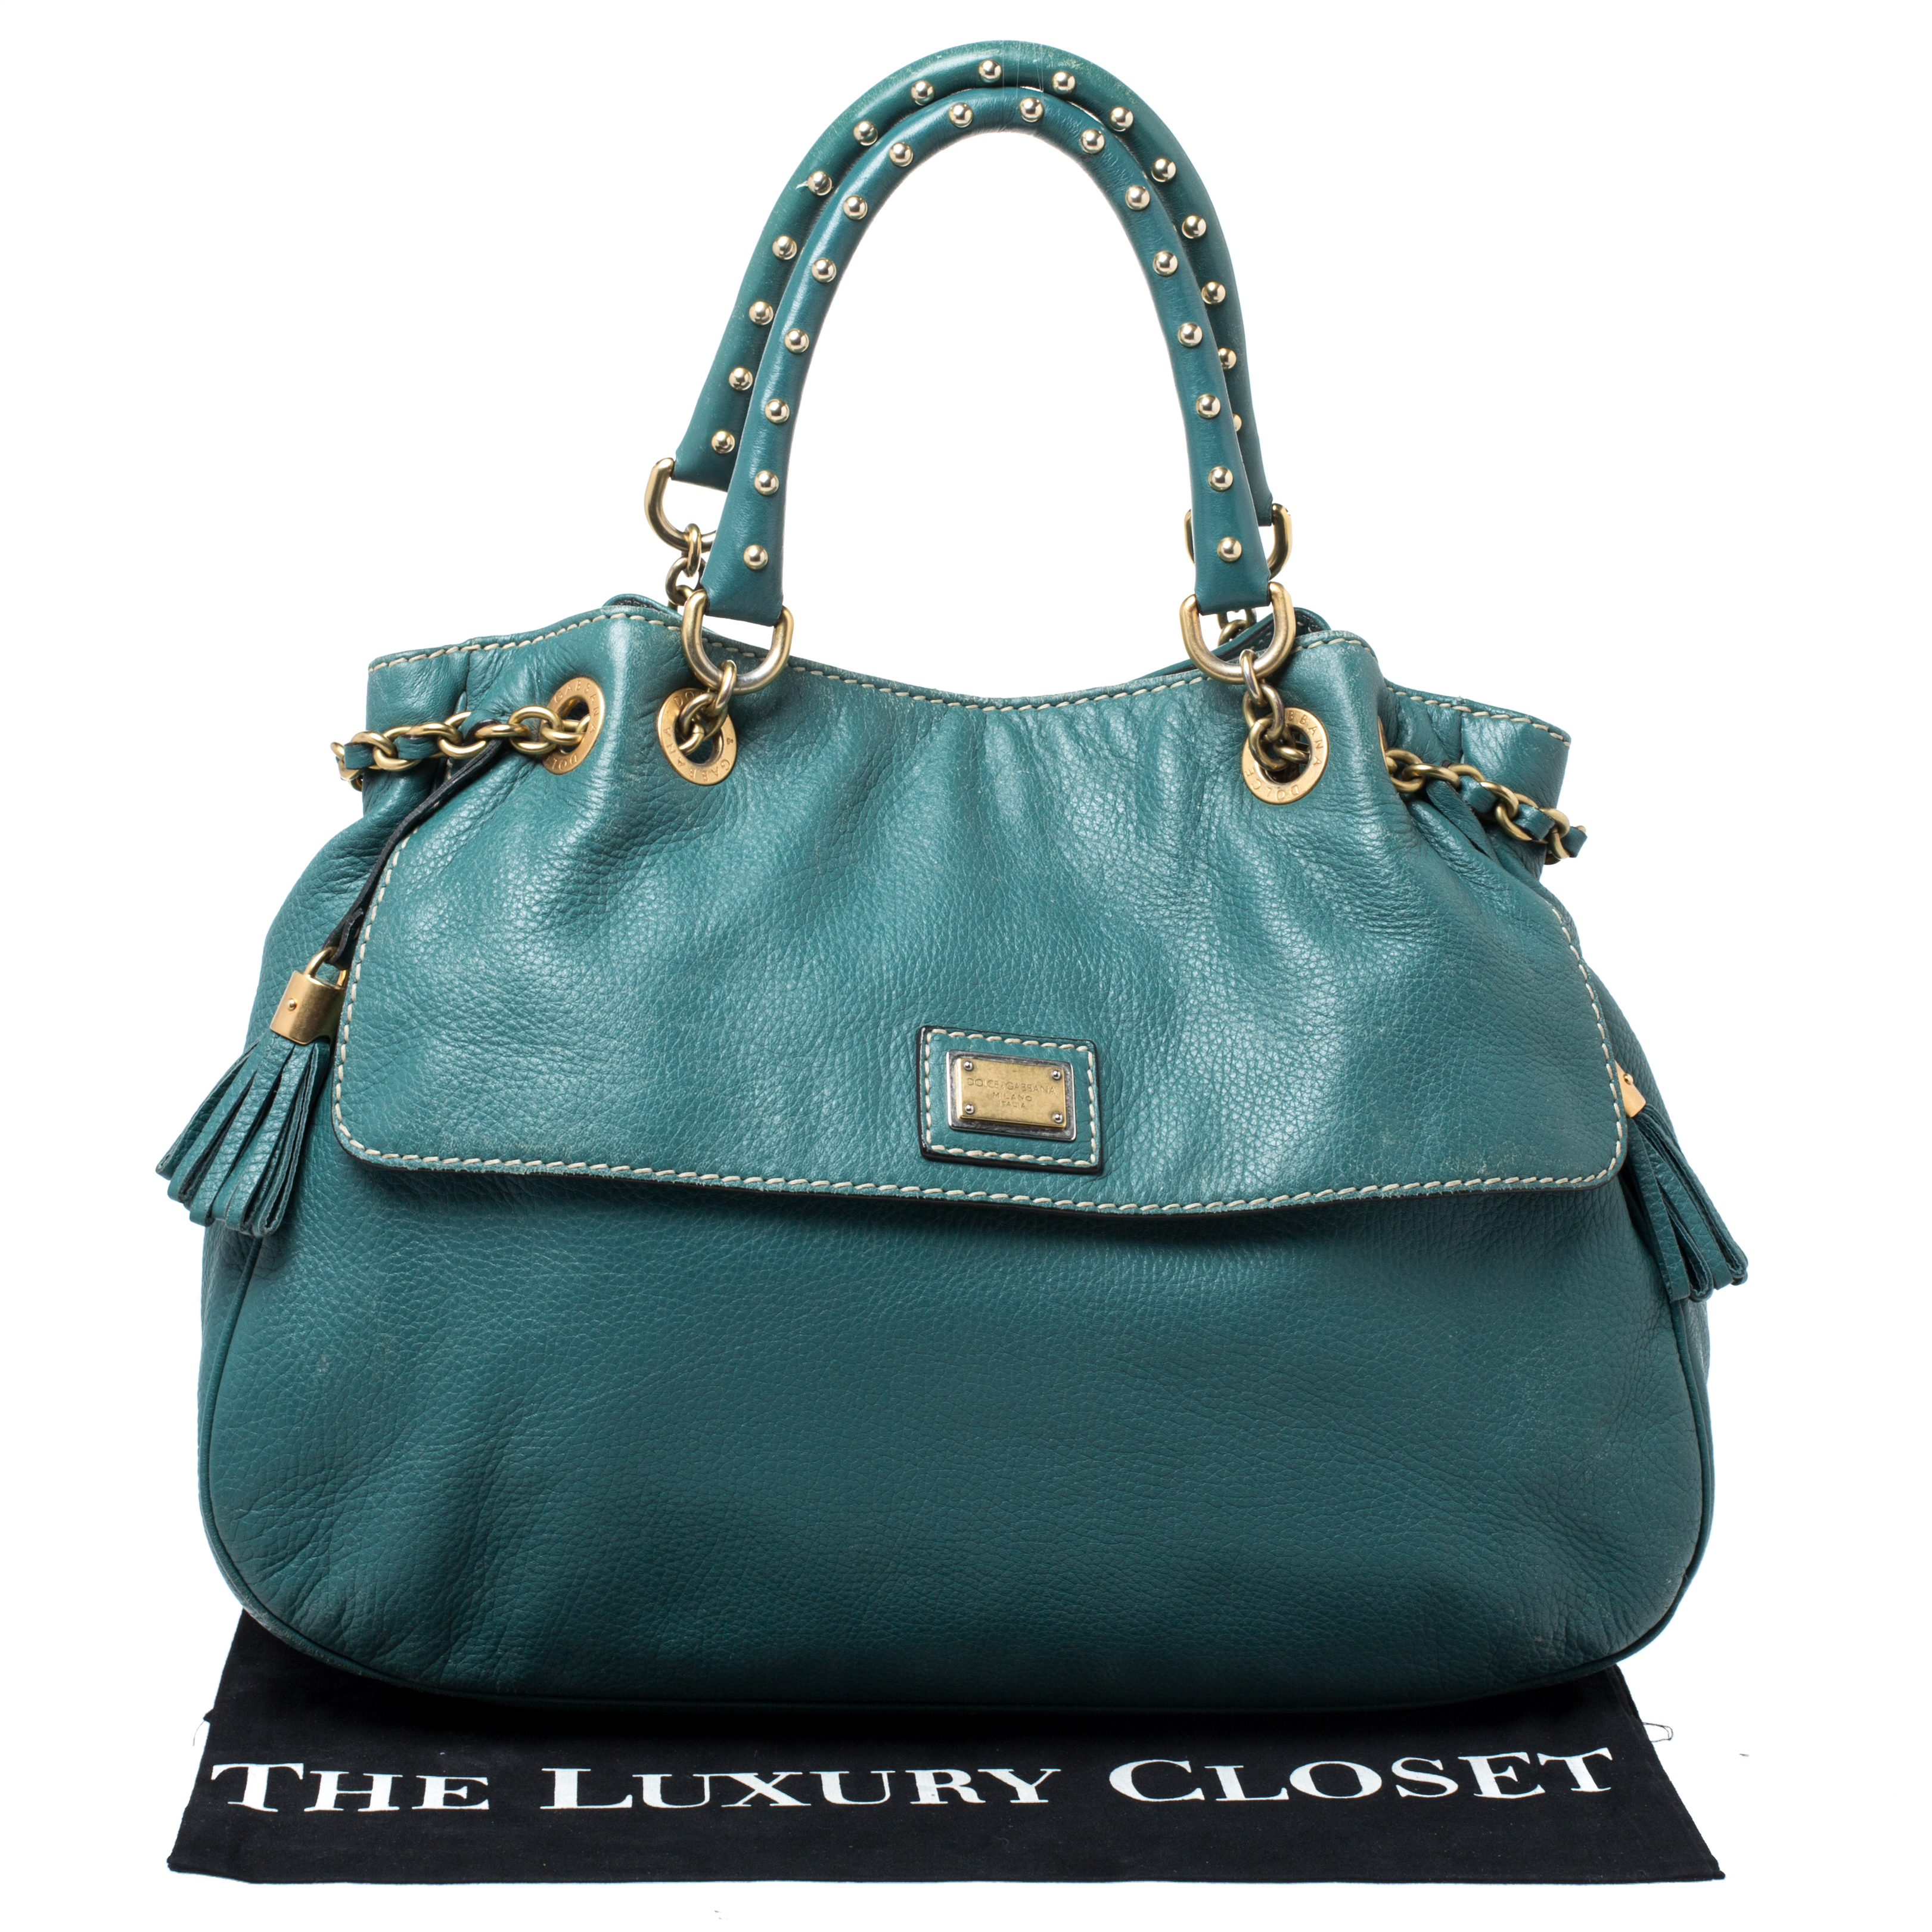 Pre-owned Dolce & Gabbana Green Leather Miss Charlotte Satchel